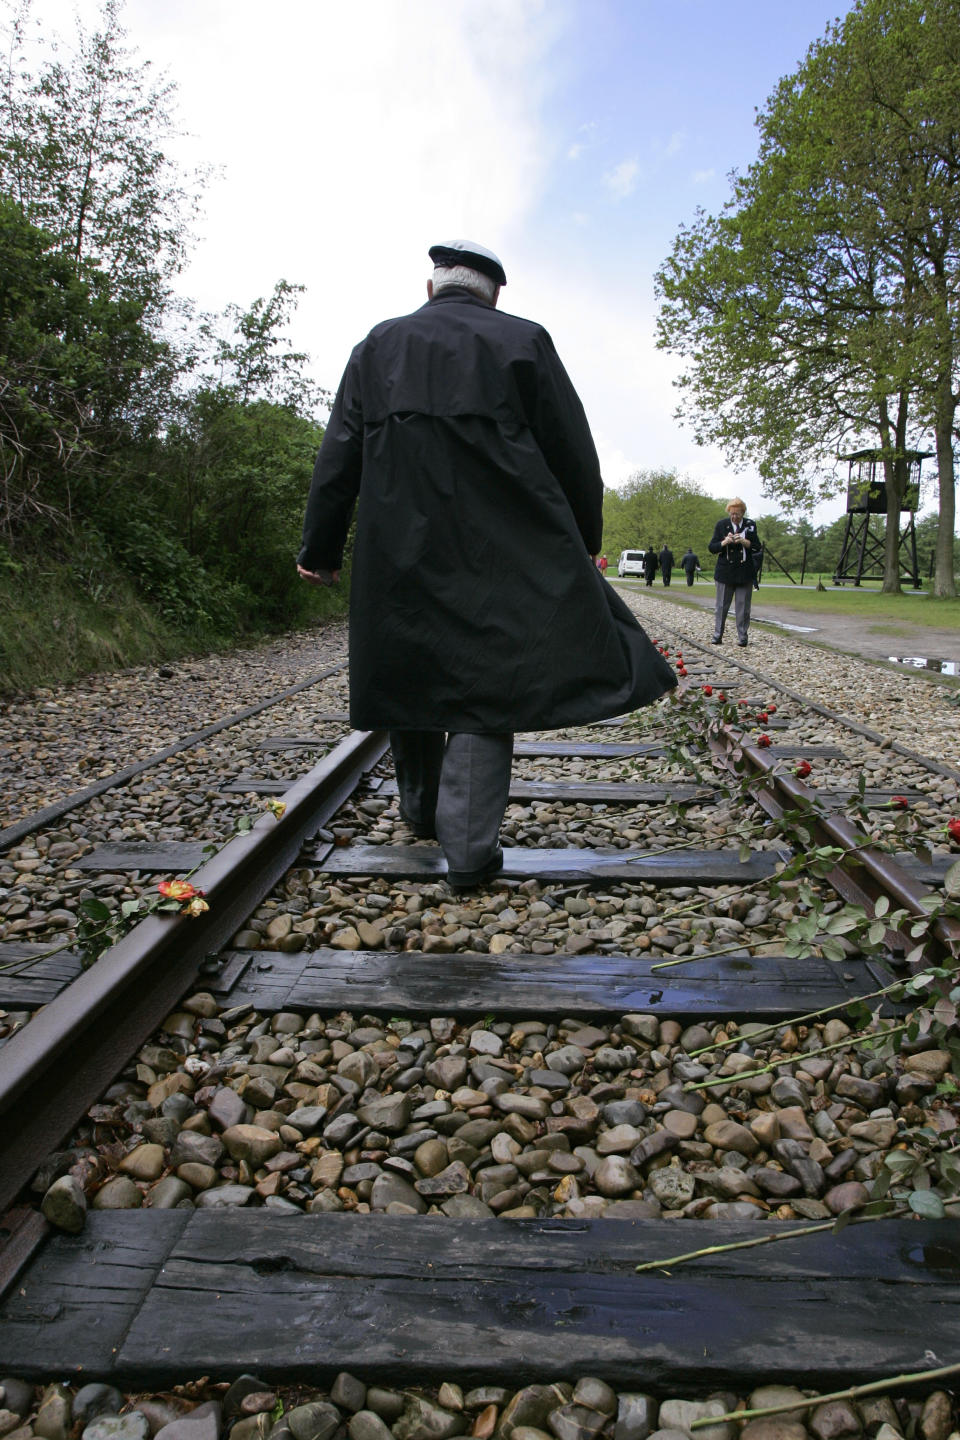 In this Monday May 9, 2015, file photo, a World War II veterans walks on the railroad tracks at former concentration camp Westerbork, the Netherlands, Monday May 9, 2005, remembering more than a hundred thousand Jews who were transported from Westerbork to Nazi death camps. The Dutch national railway company NS says it will set up a commission to investigate how it can pay individual reparations for its role in mass deportations of Jews by Nazi occupiers during World War II. (AP Photo/Peter Dejong)